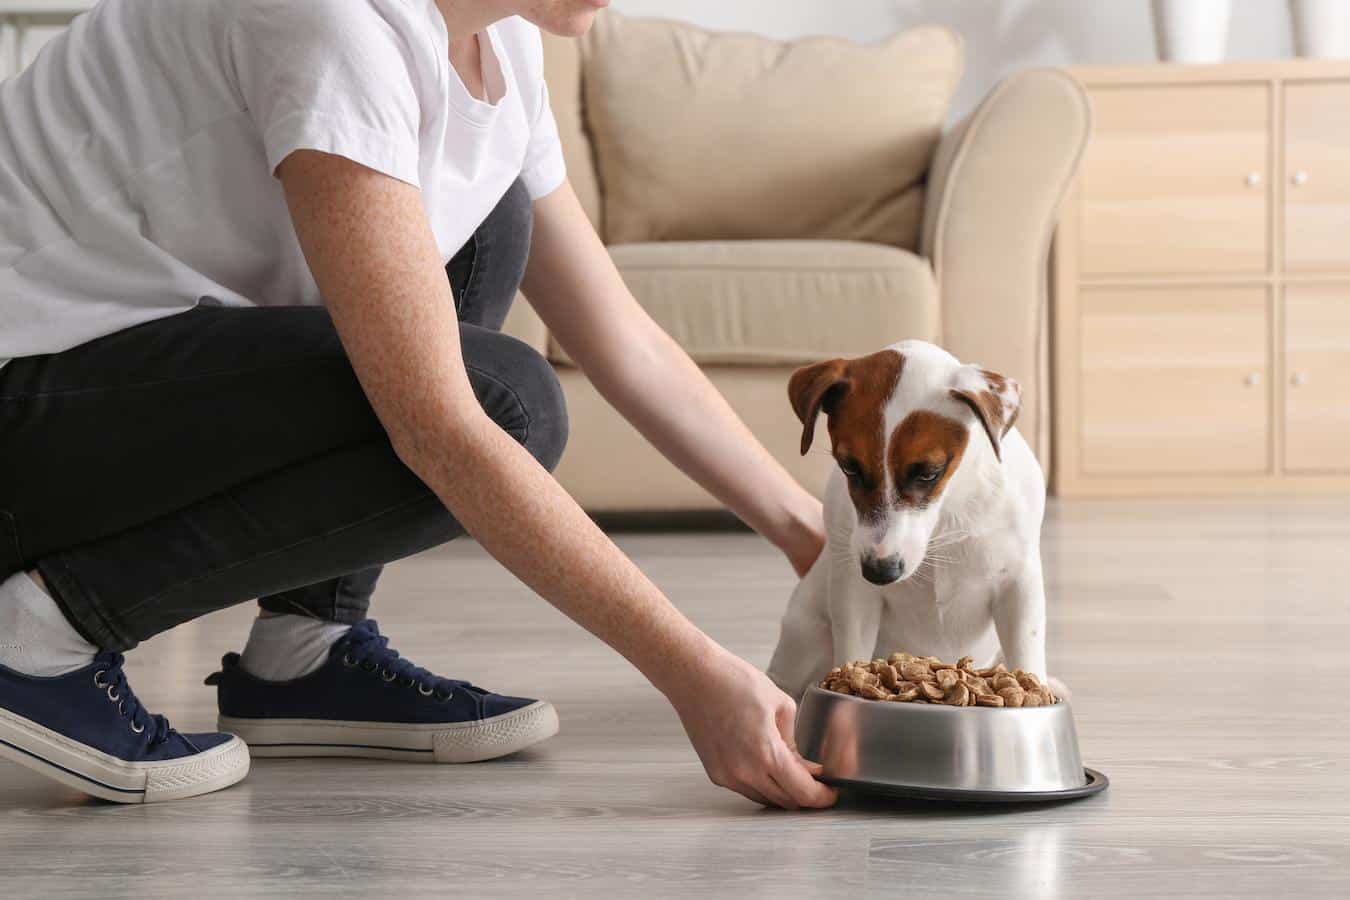 person putting down a bowl for their dog raw food dog starve partial anorexia healthy dog won't eat food but will eat treats dog eat treats reasons dogs